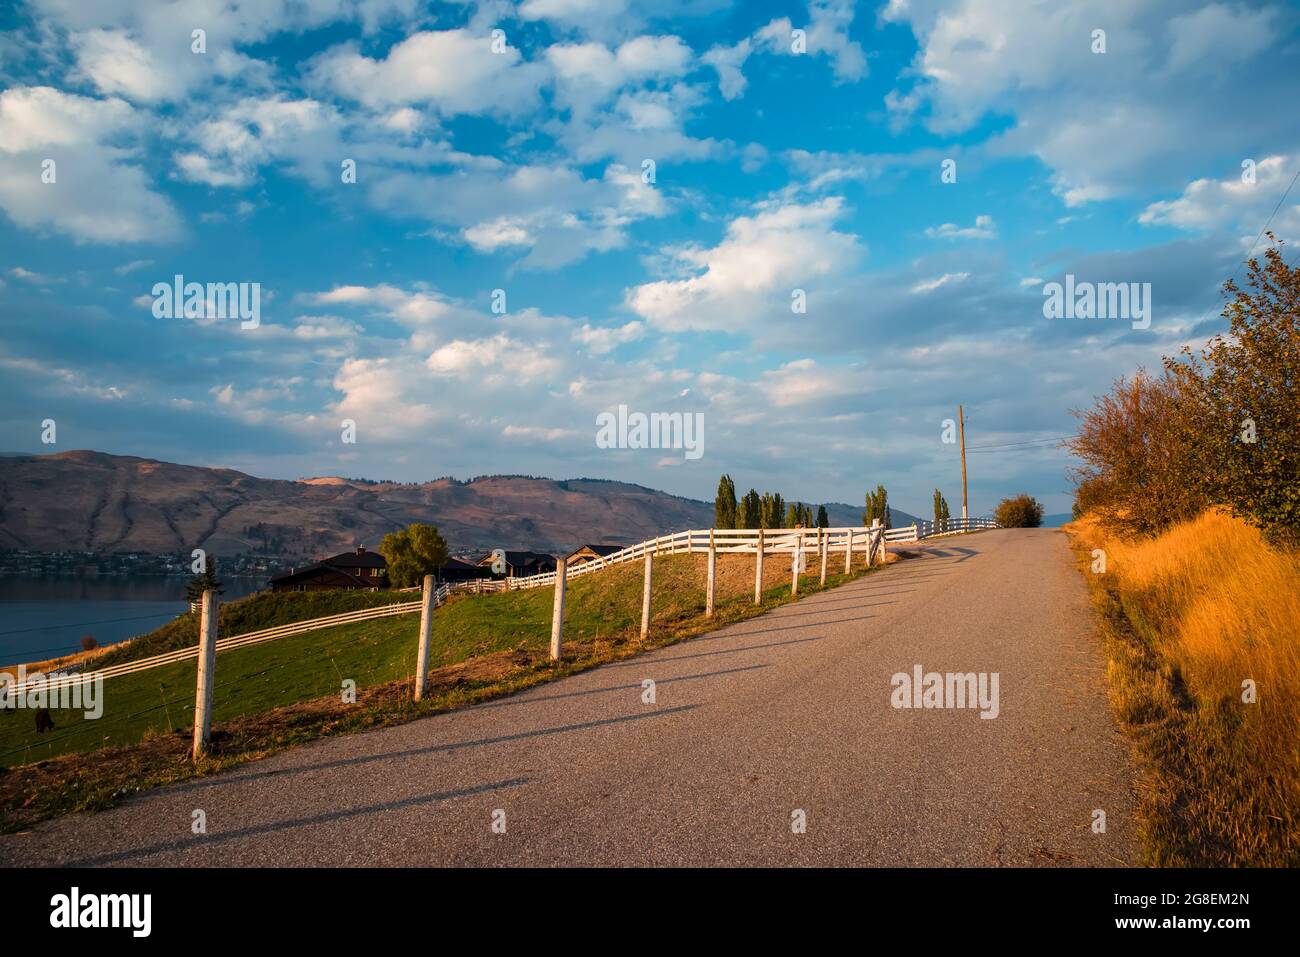 white fence near the road, farmhouse, lake, village and hills in the background. Blue sky with white clouds. Stock Photo